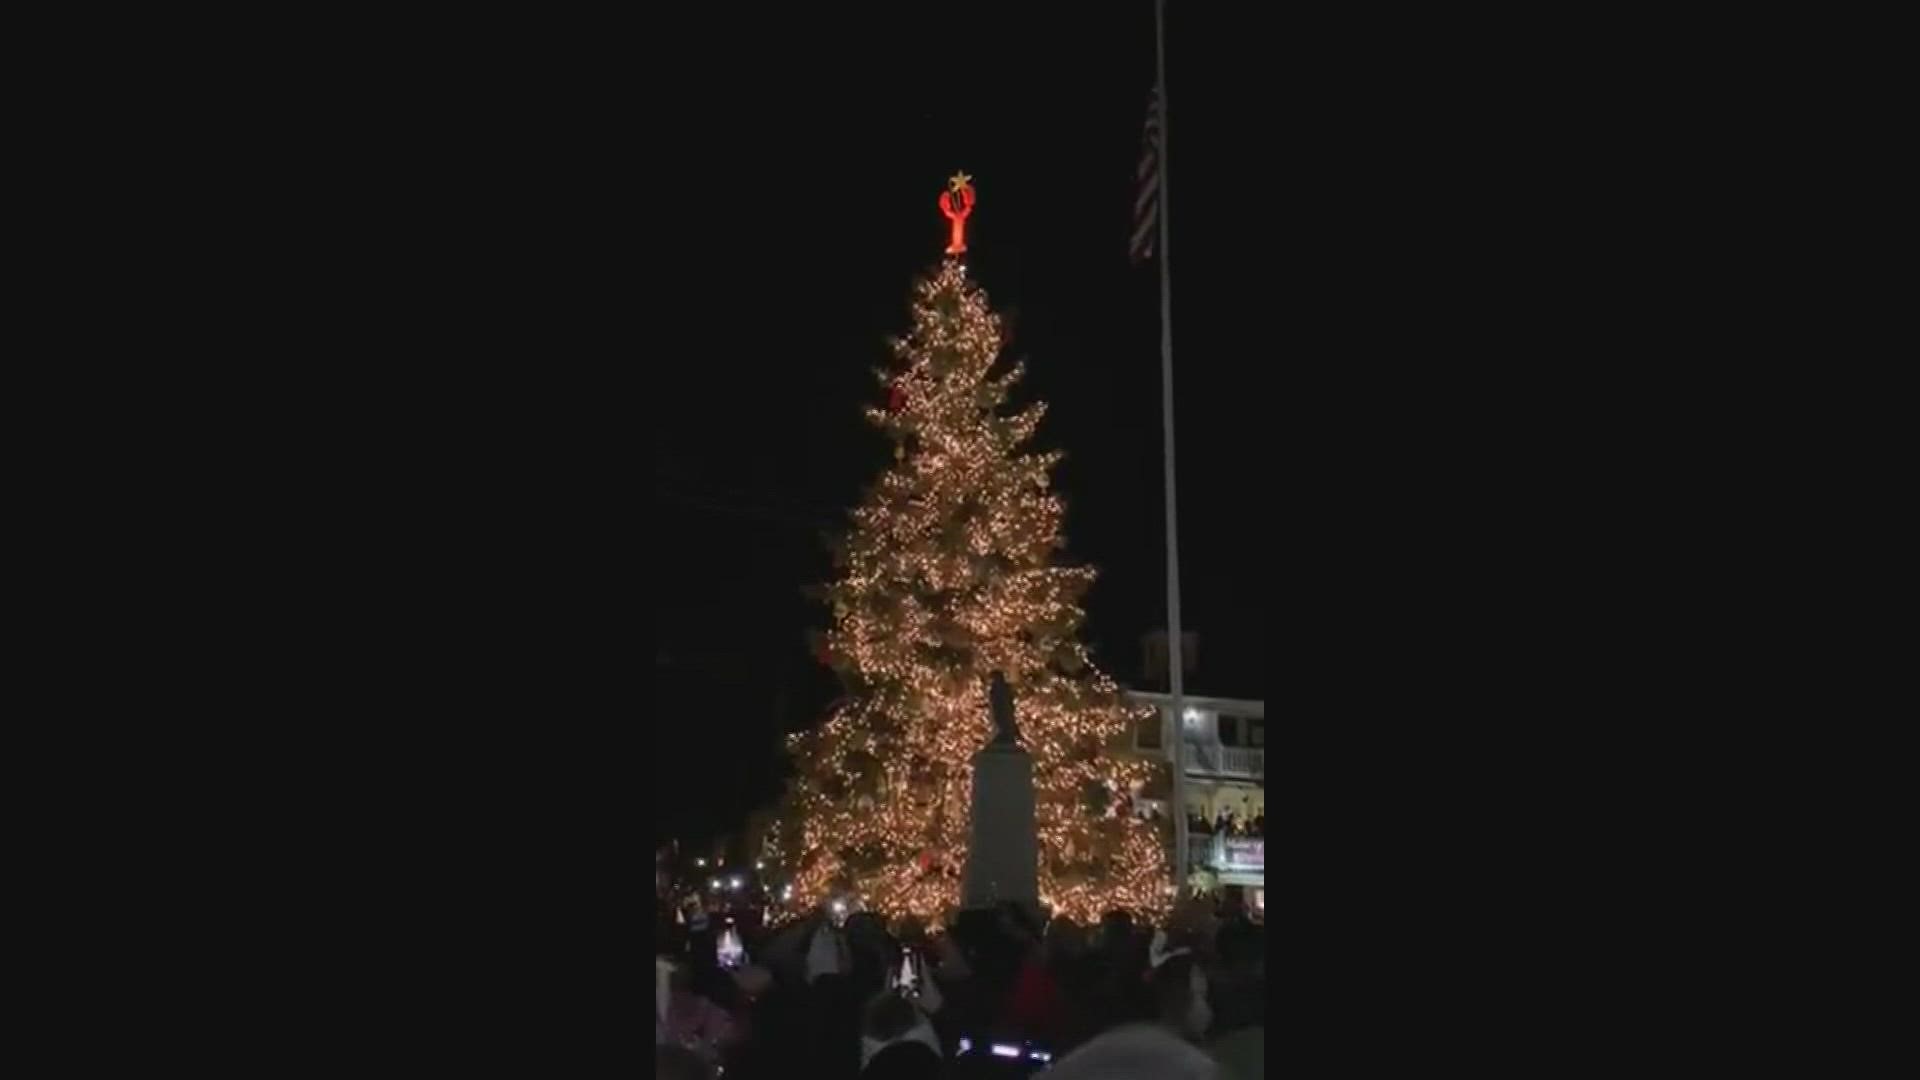 On Friday, people gathered for the 41st Christmas Prelude event and Christmas tree lighting.